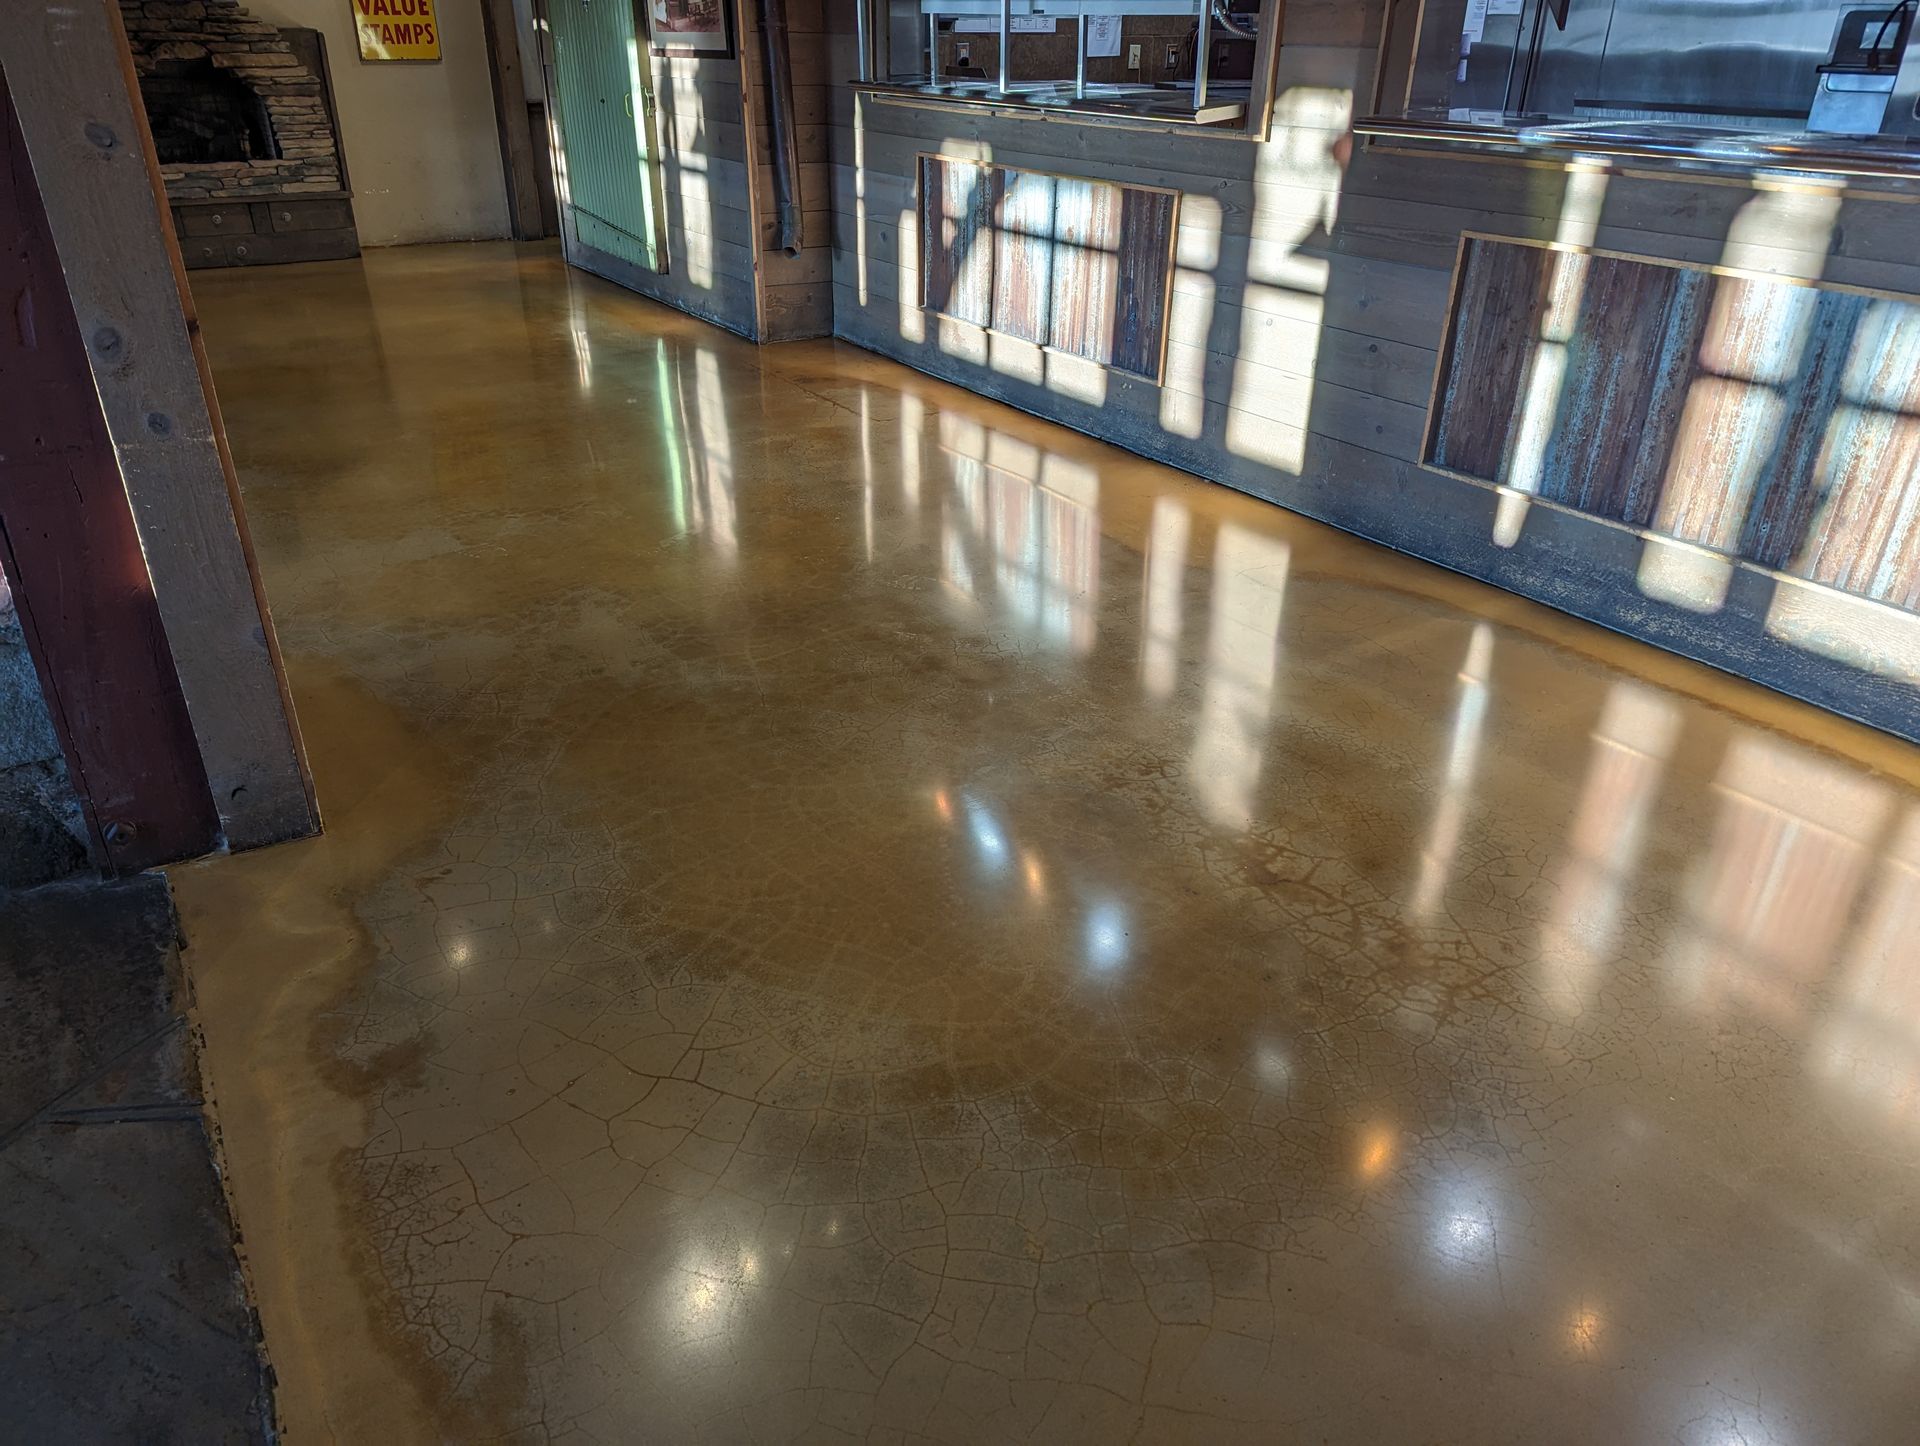 A shiny concrete floor with reflections of windows in it.